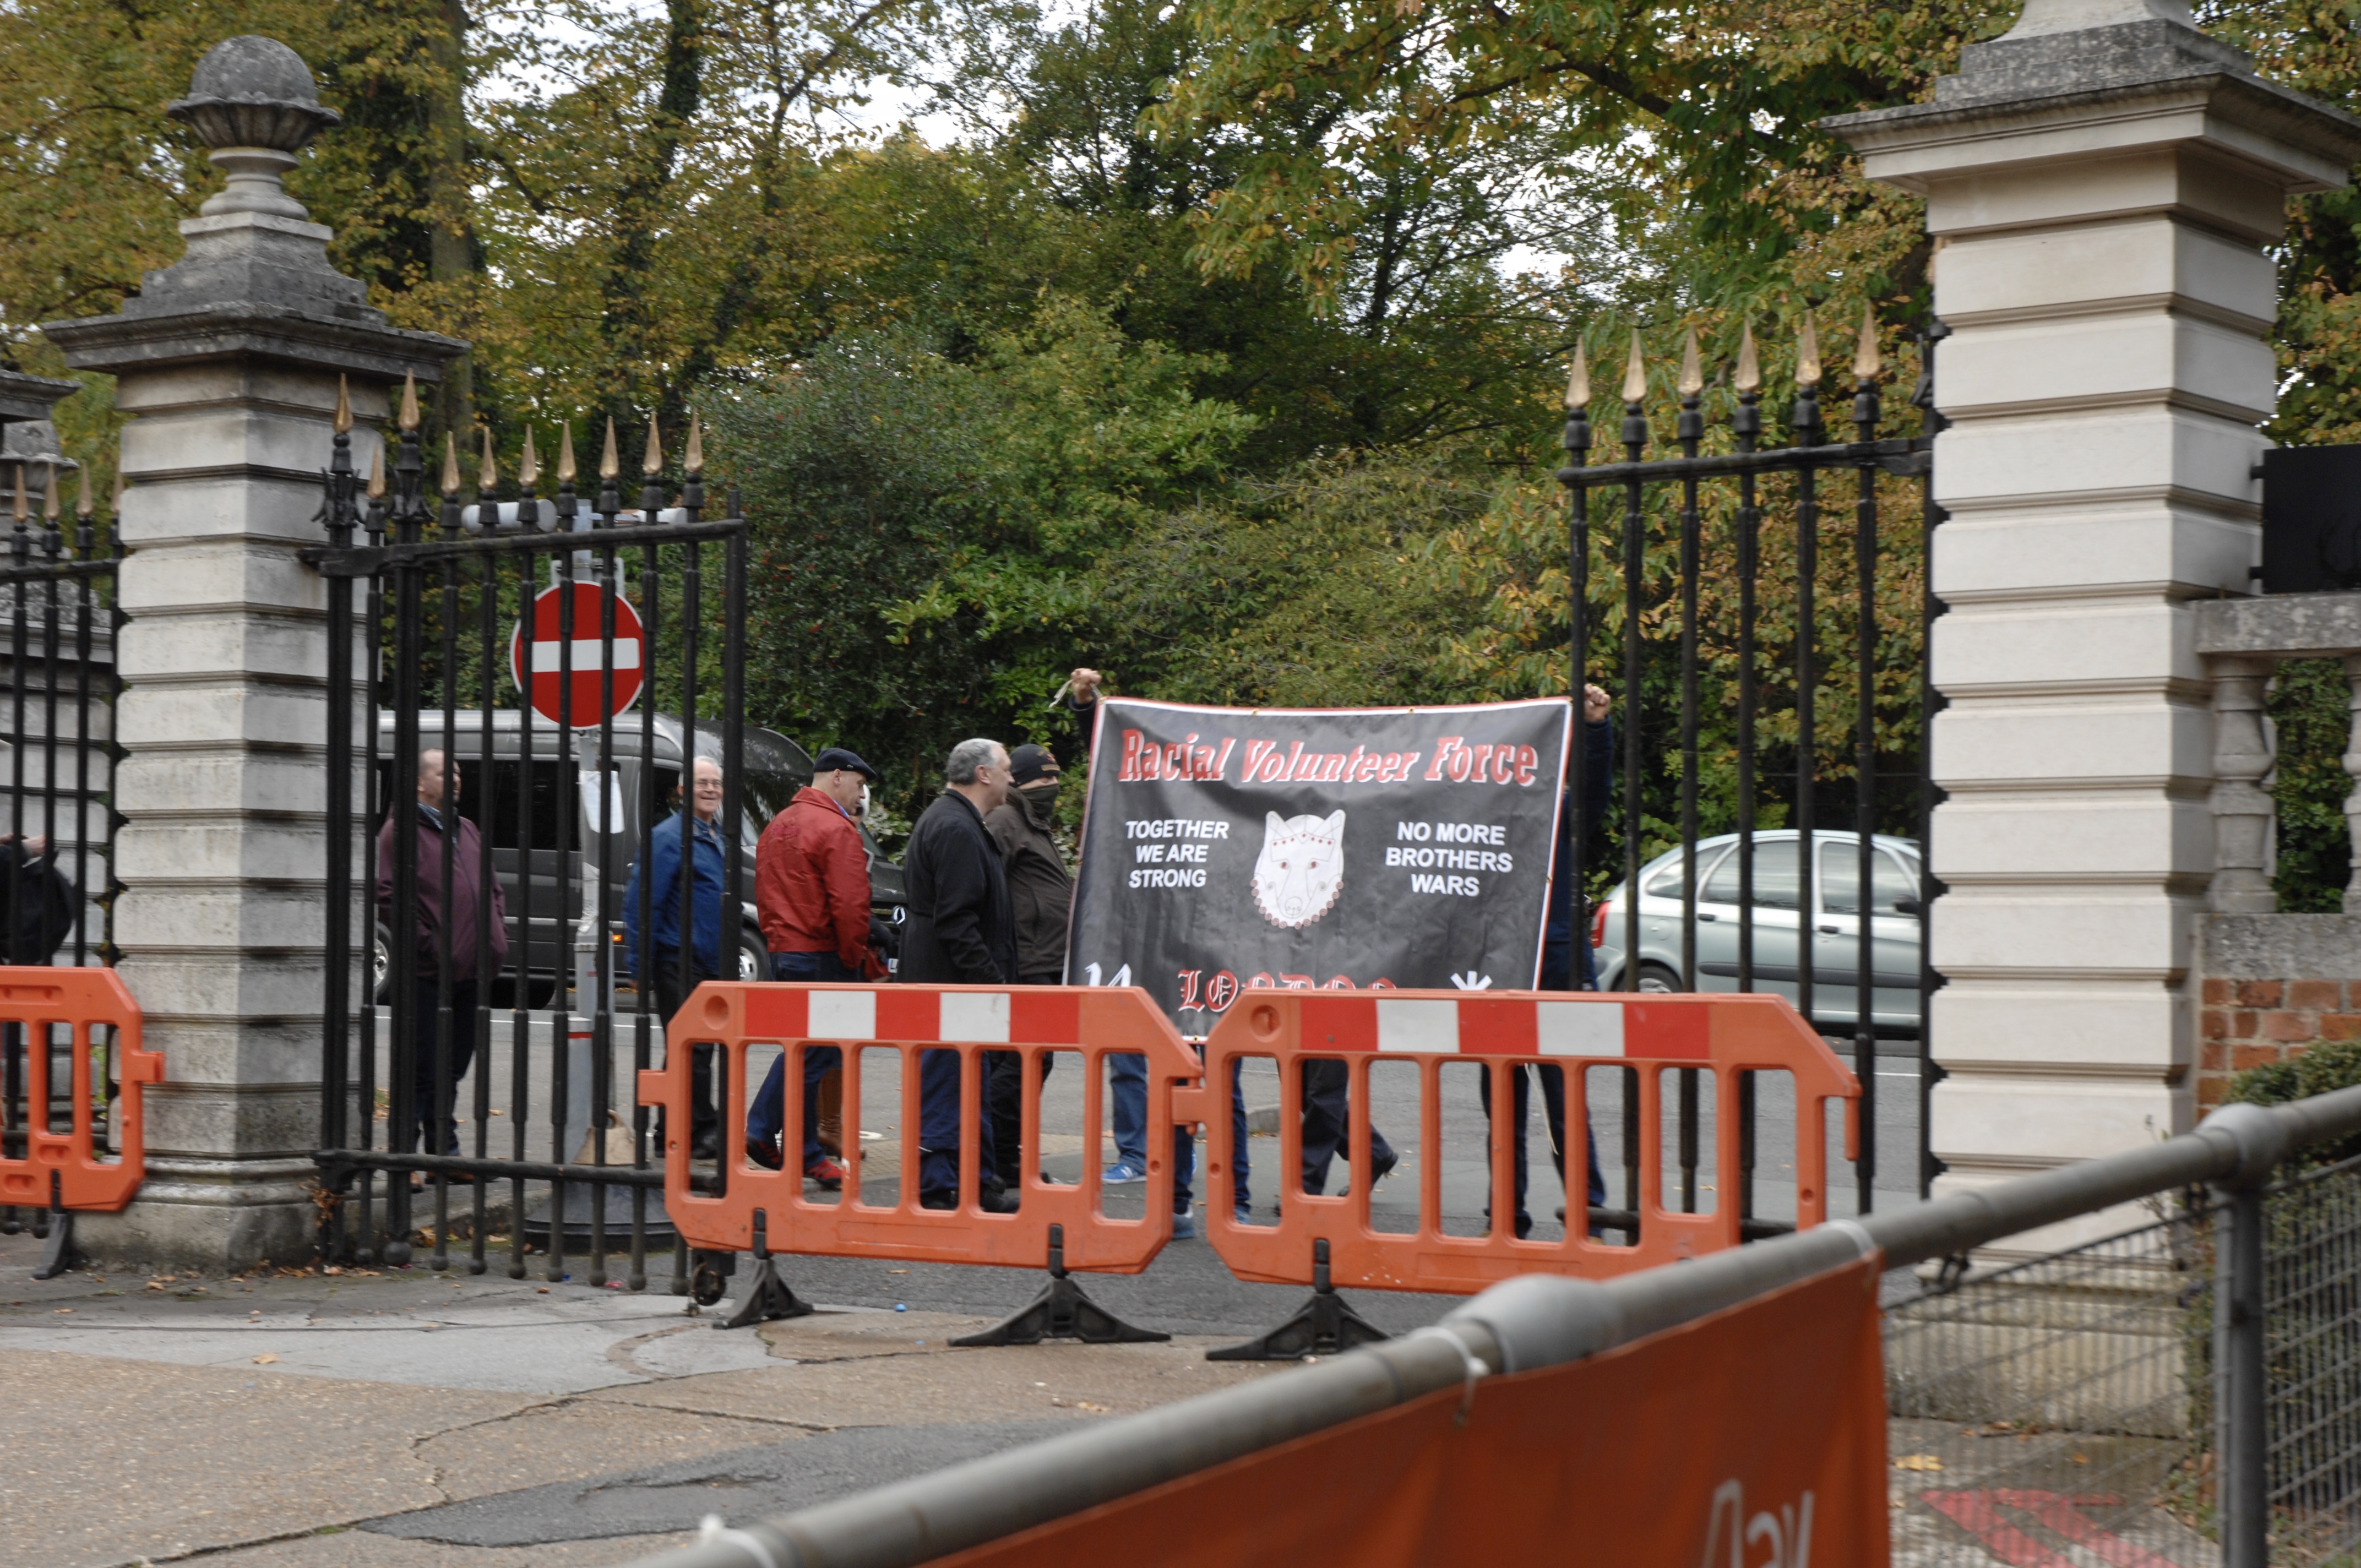 Racial Volunteer Force clashes with student protesters at Royal Holloway